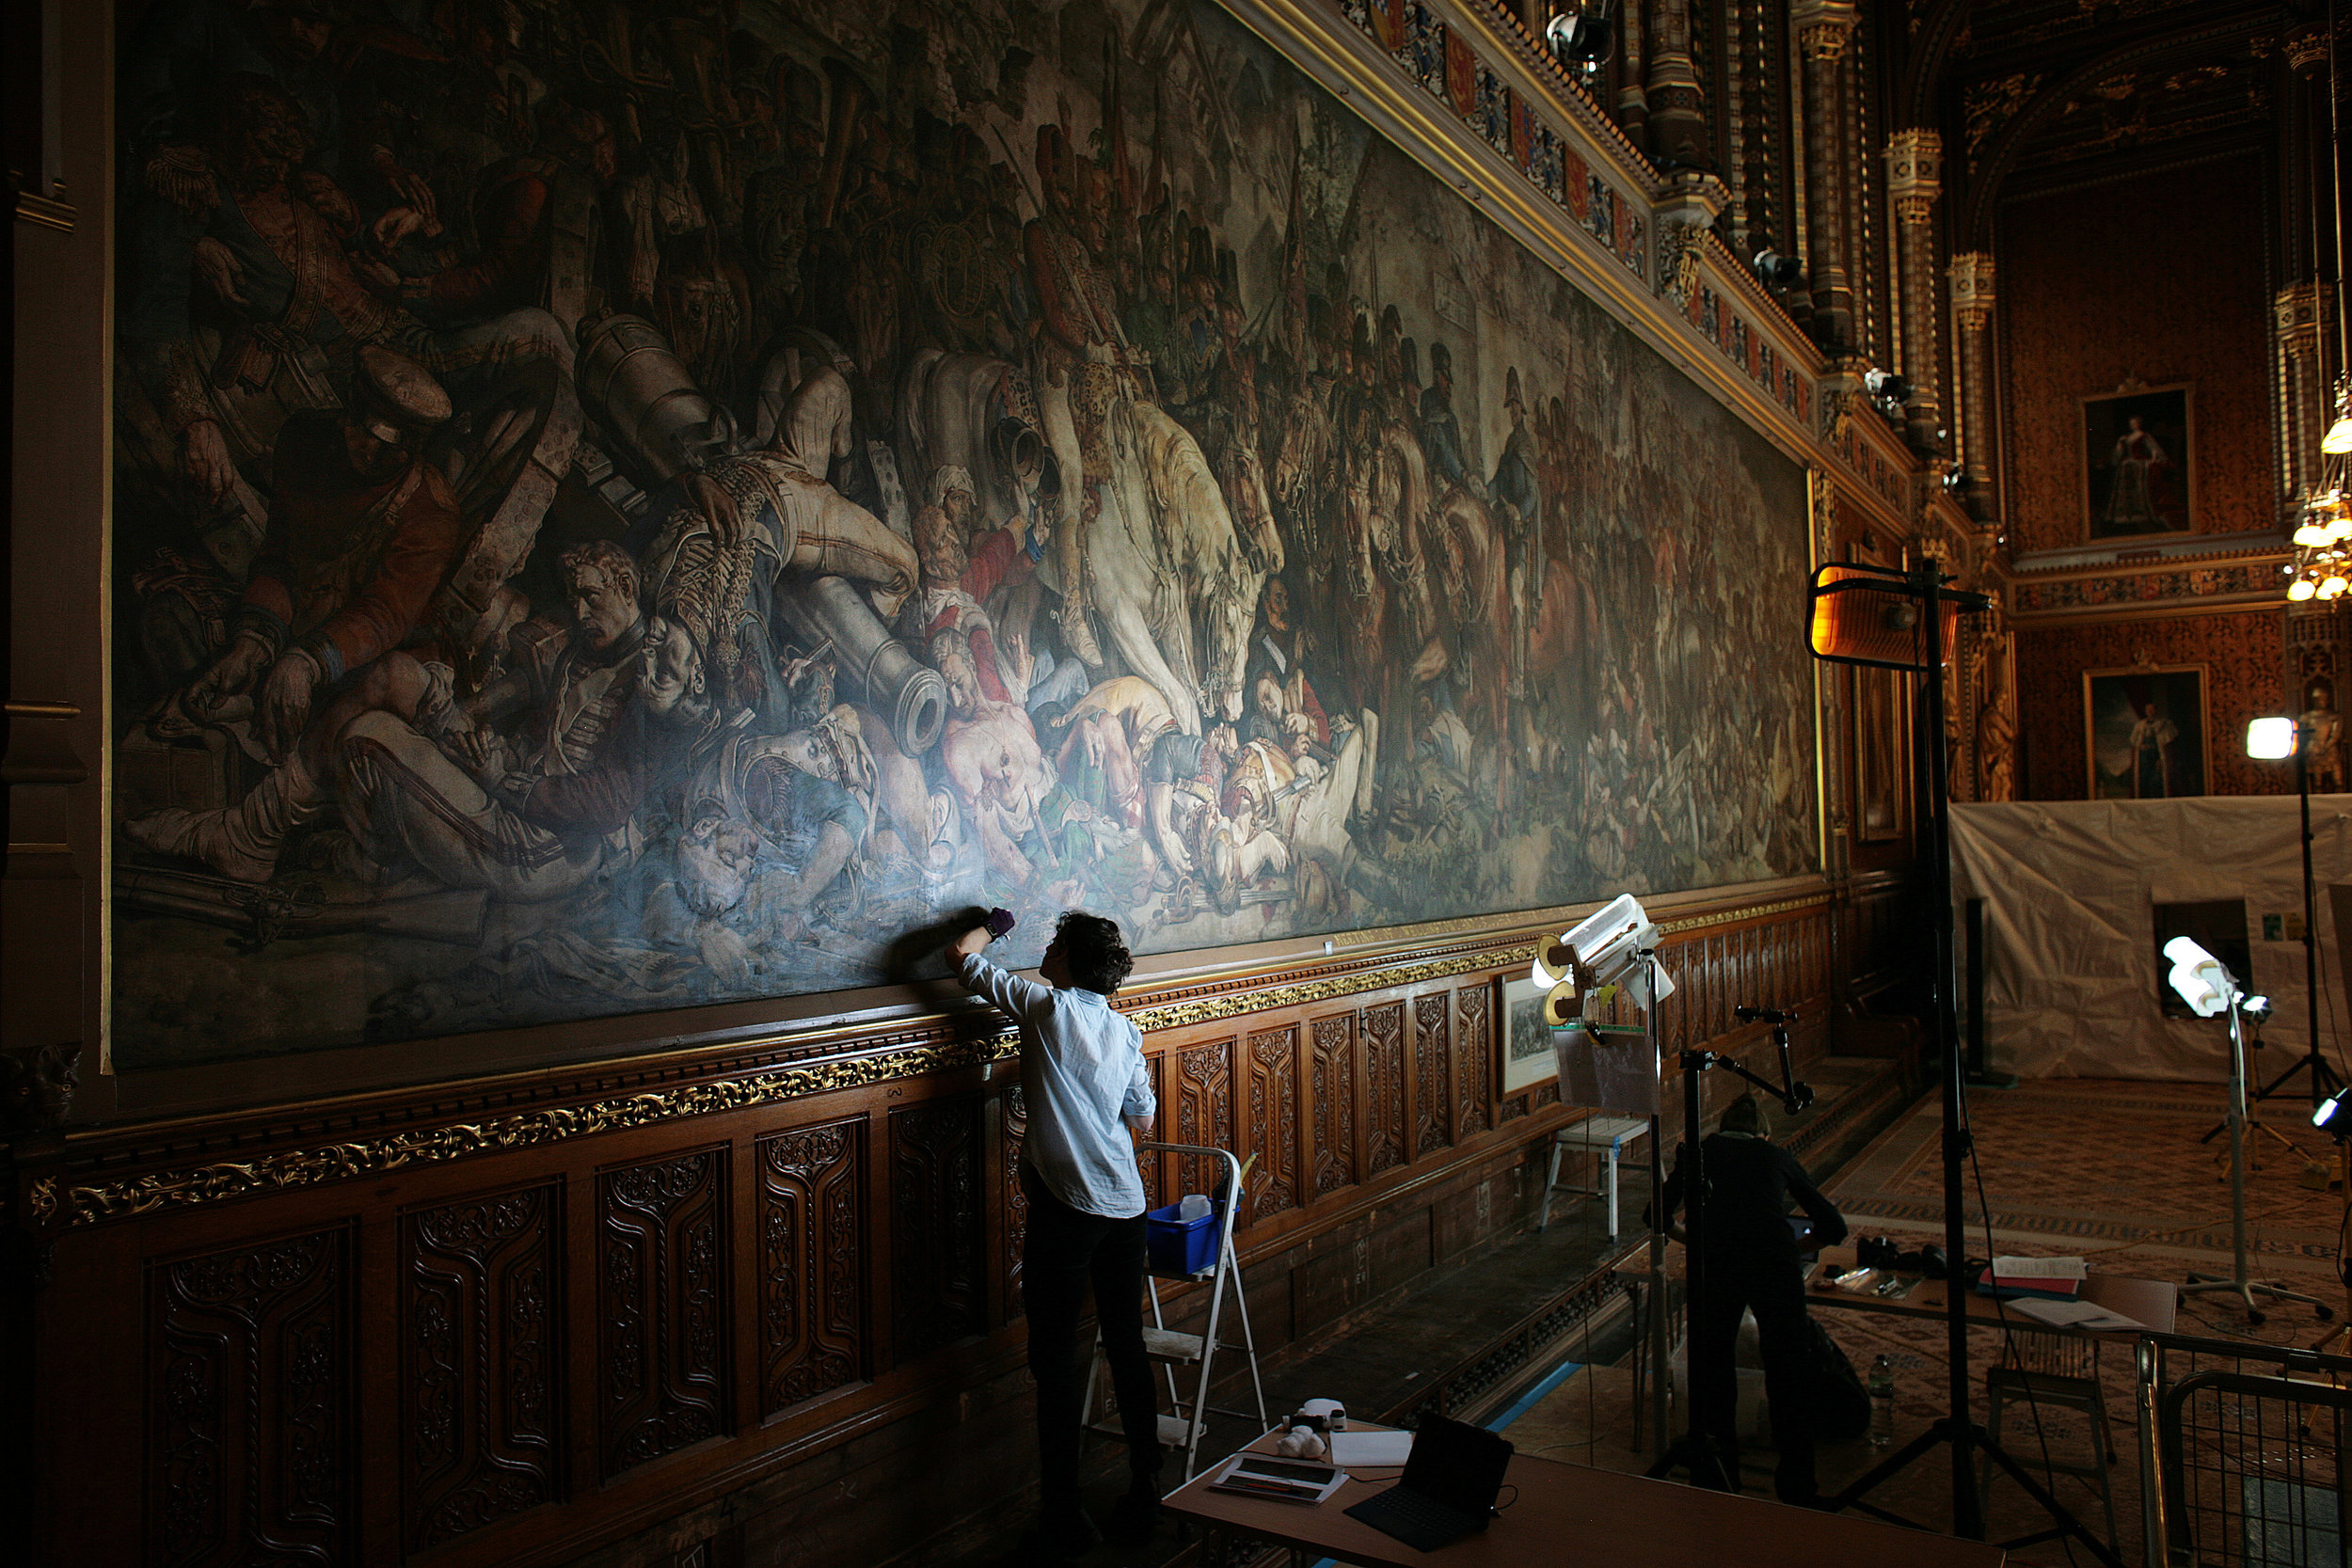  Conservators at The House of Lords working on Daniel Maclise�s murals �The Meeting of Wellington and Bl�cher after the Battle of Waterloo� and �The Death of Nelson at the Battle of Trafalgar�.
Photo by Martin Godwin, 19 April 2018
 